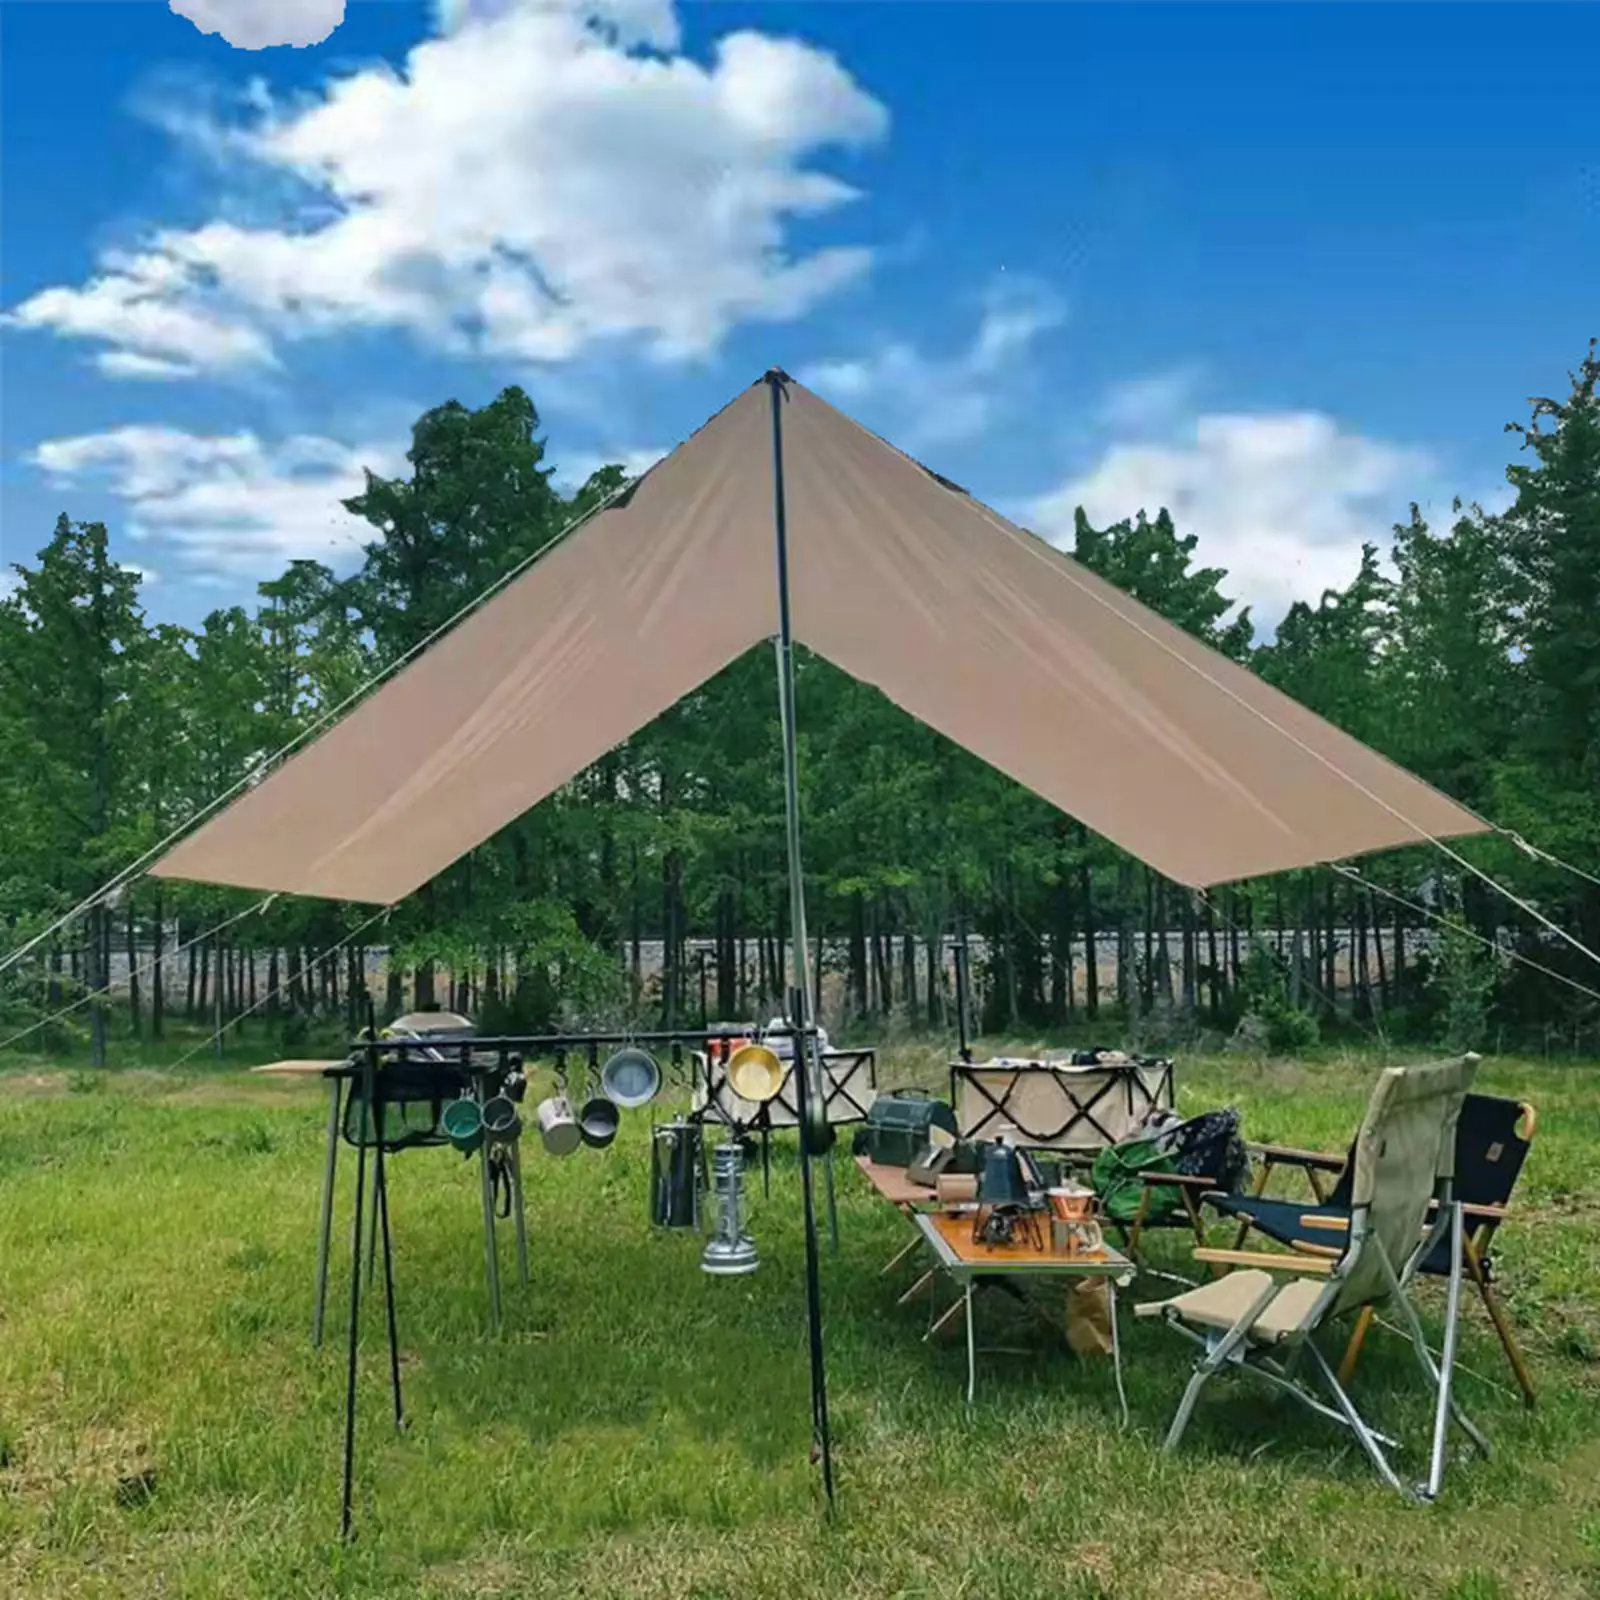 Camping Tent Tarp Sun Shelter Sun Protection Canopy Awning for Garden Hiking